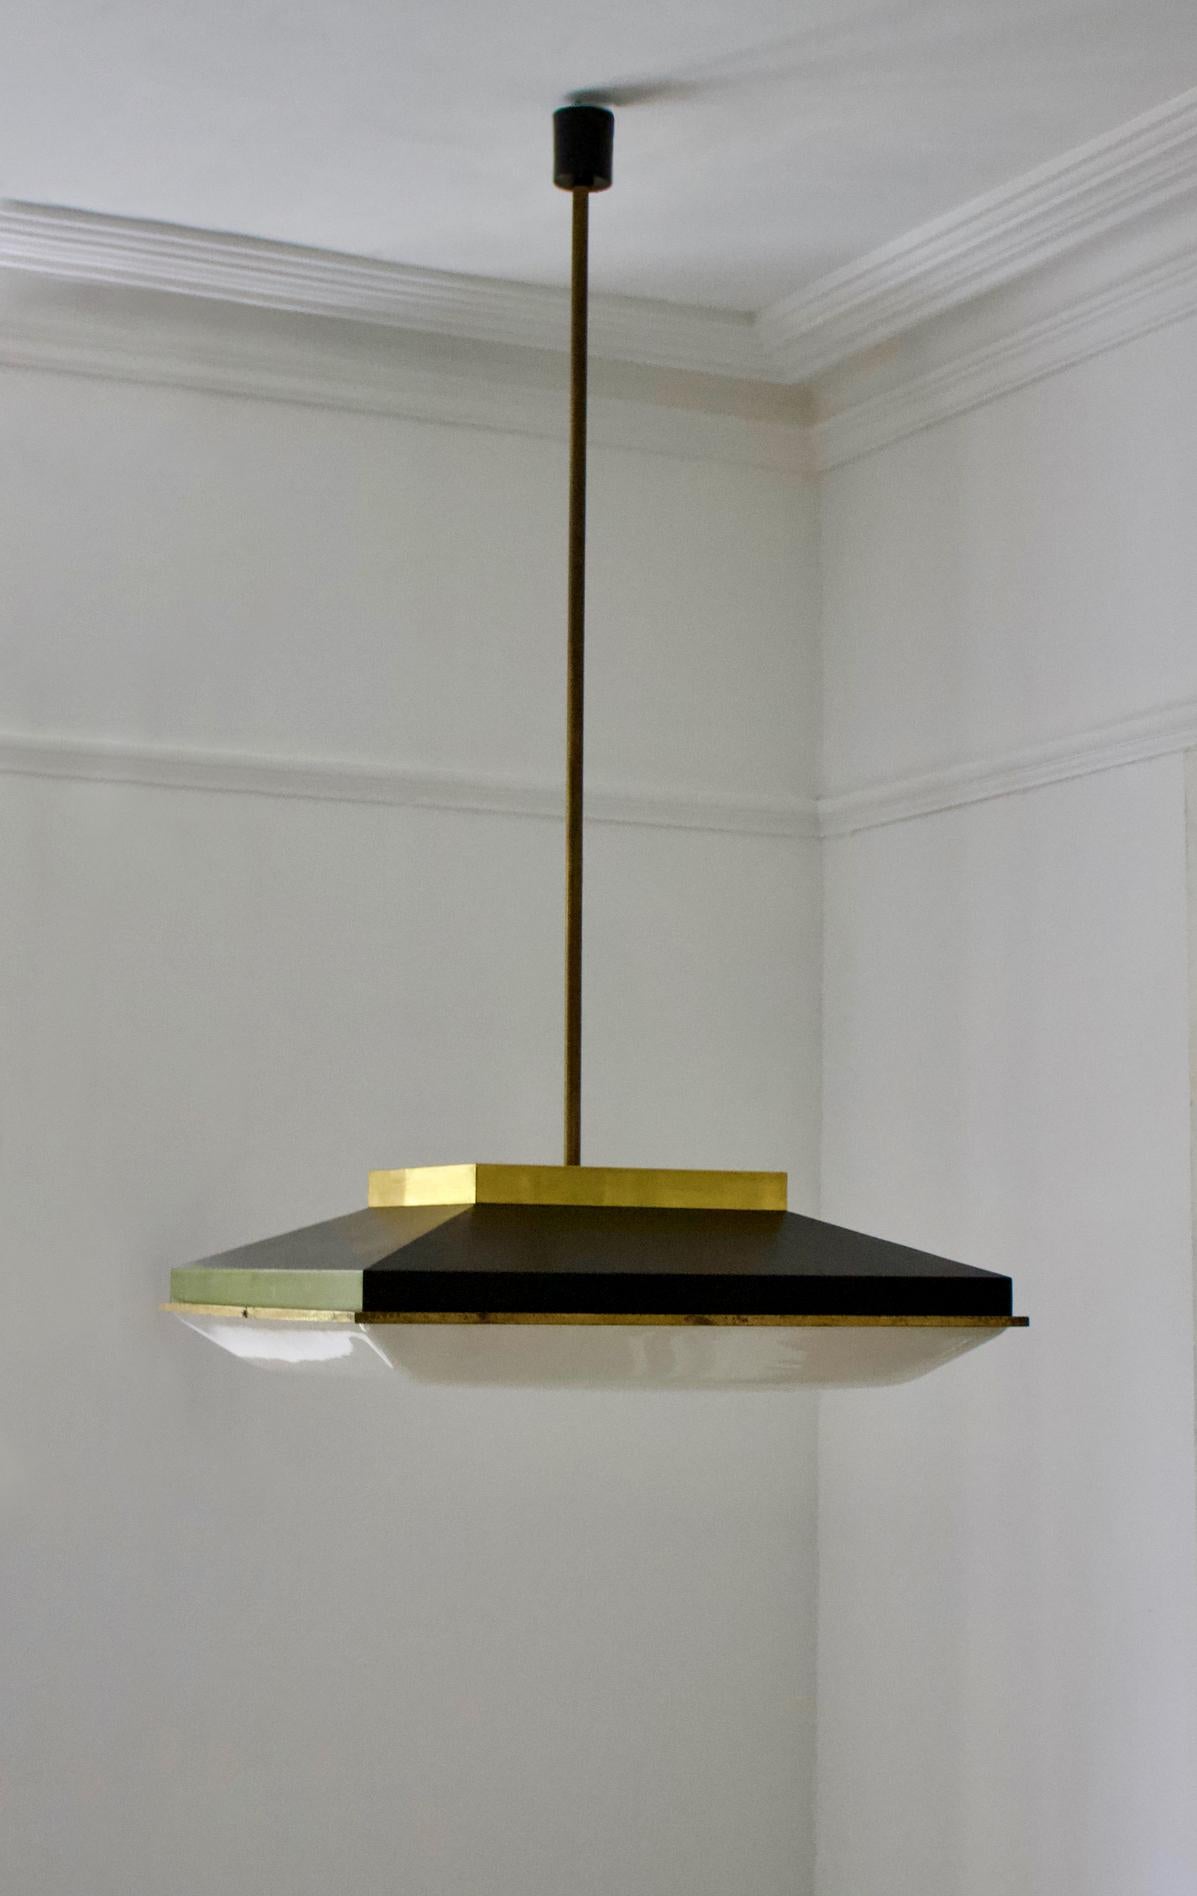 A striking square pendant light with black lacquered frame, plexiglass diffuser, and brass details. Design attributed to Stilnovo of Italy, 1960s.

Good condition, with minor signs of age-related wear and aged patina to the brass. The scale of this